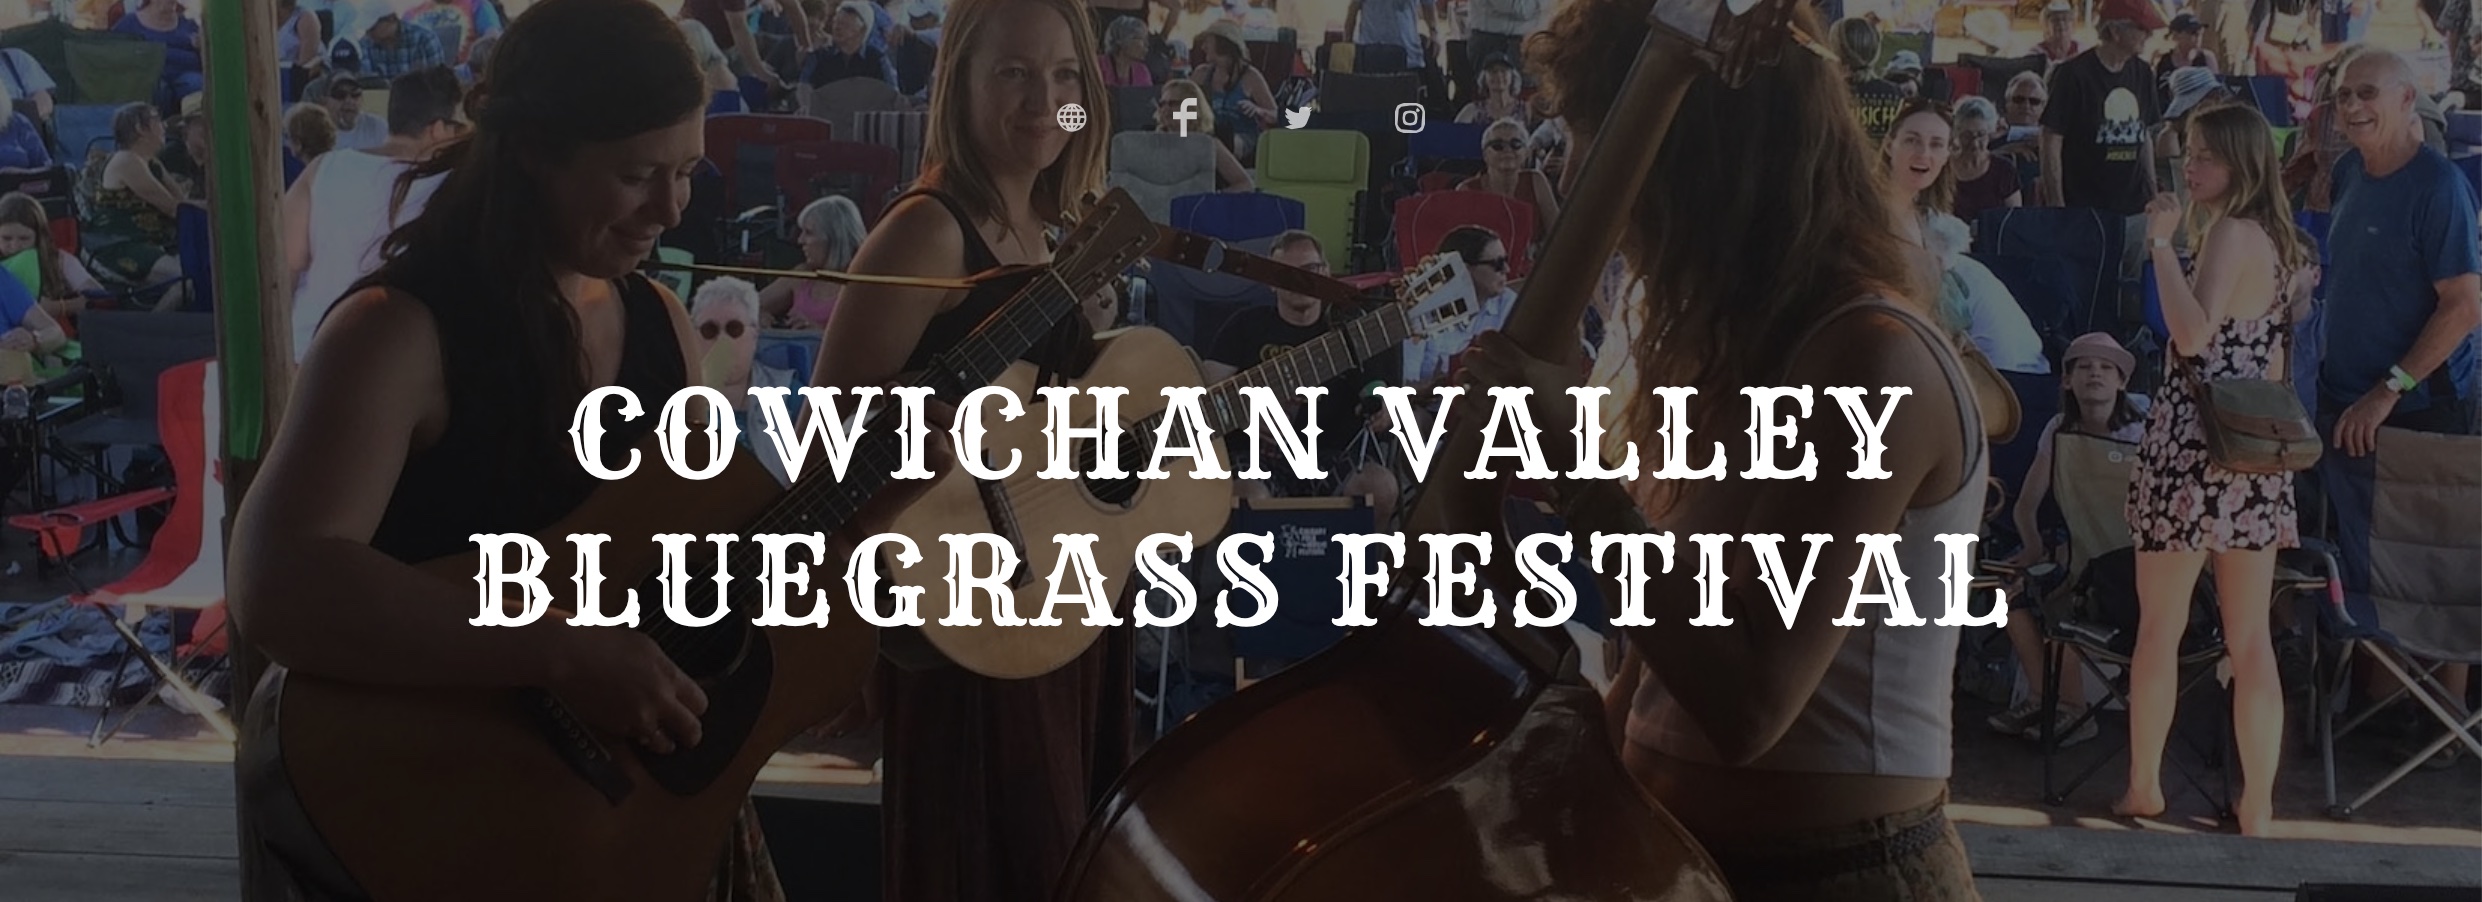 COWICHAN VALLEY BLUEGRASS FESTIVAL | Visitor In Victoria